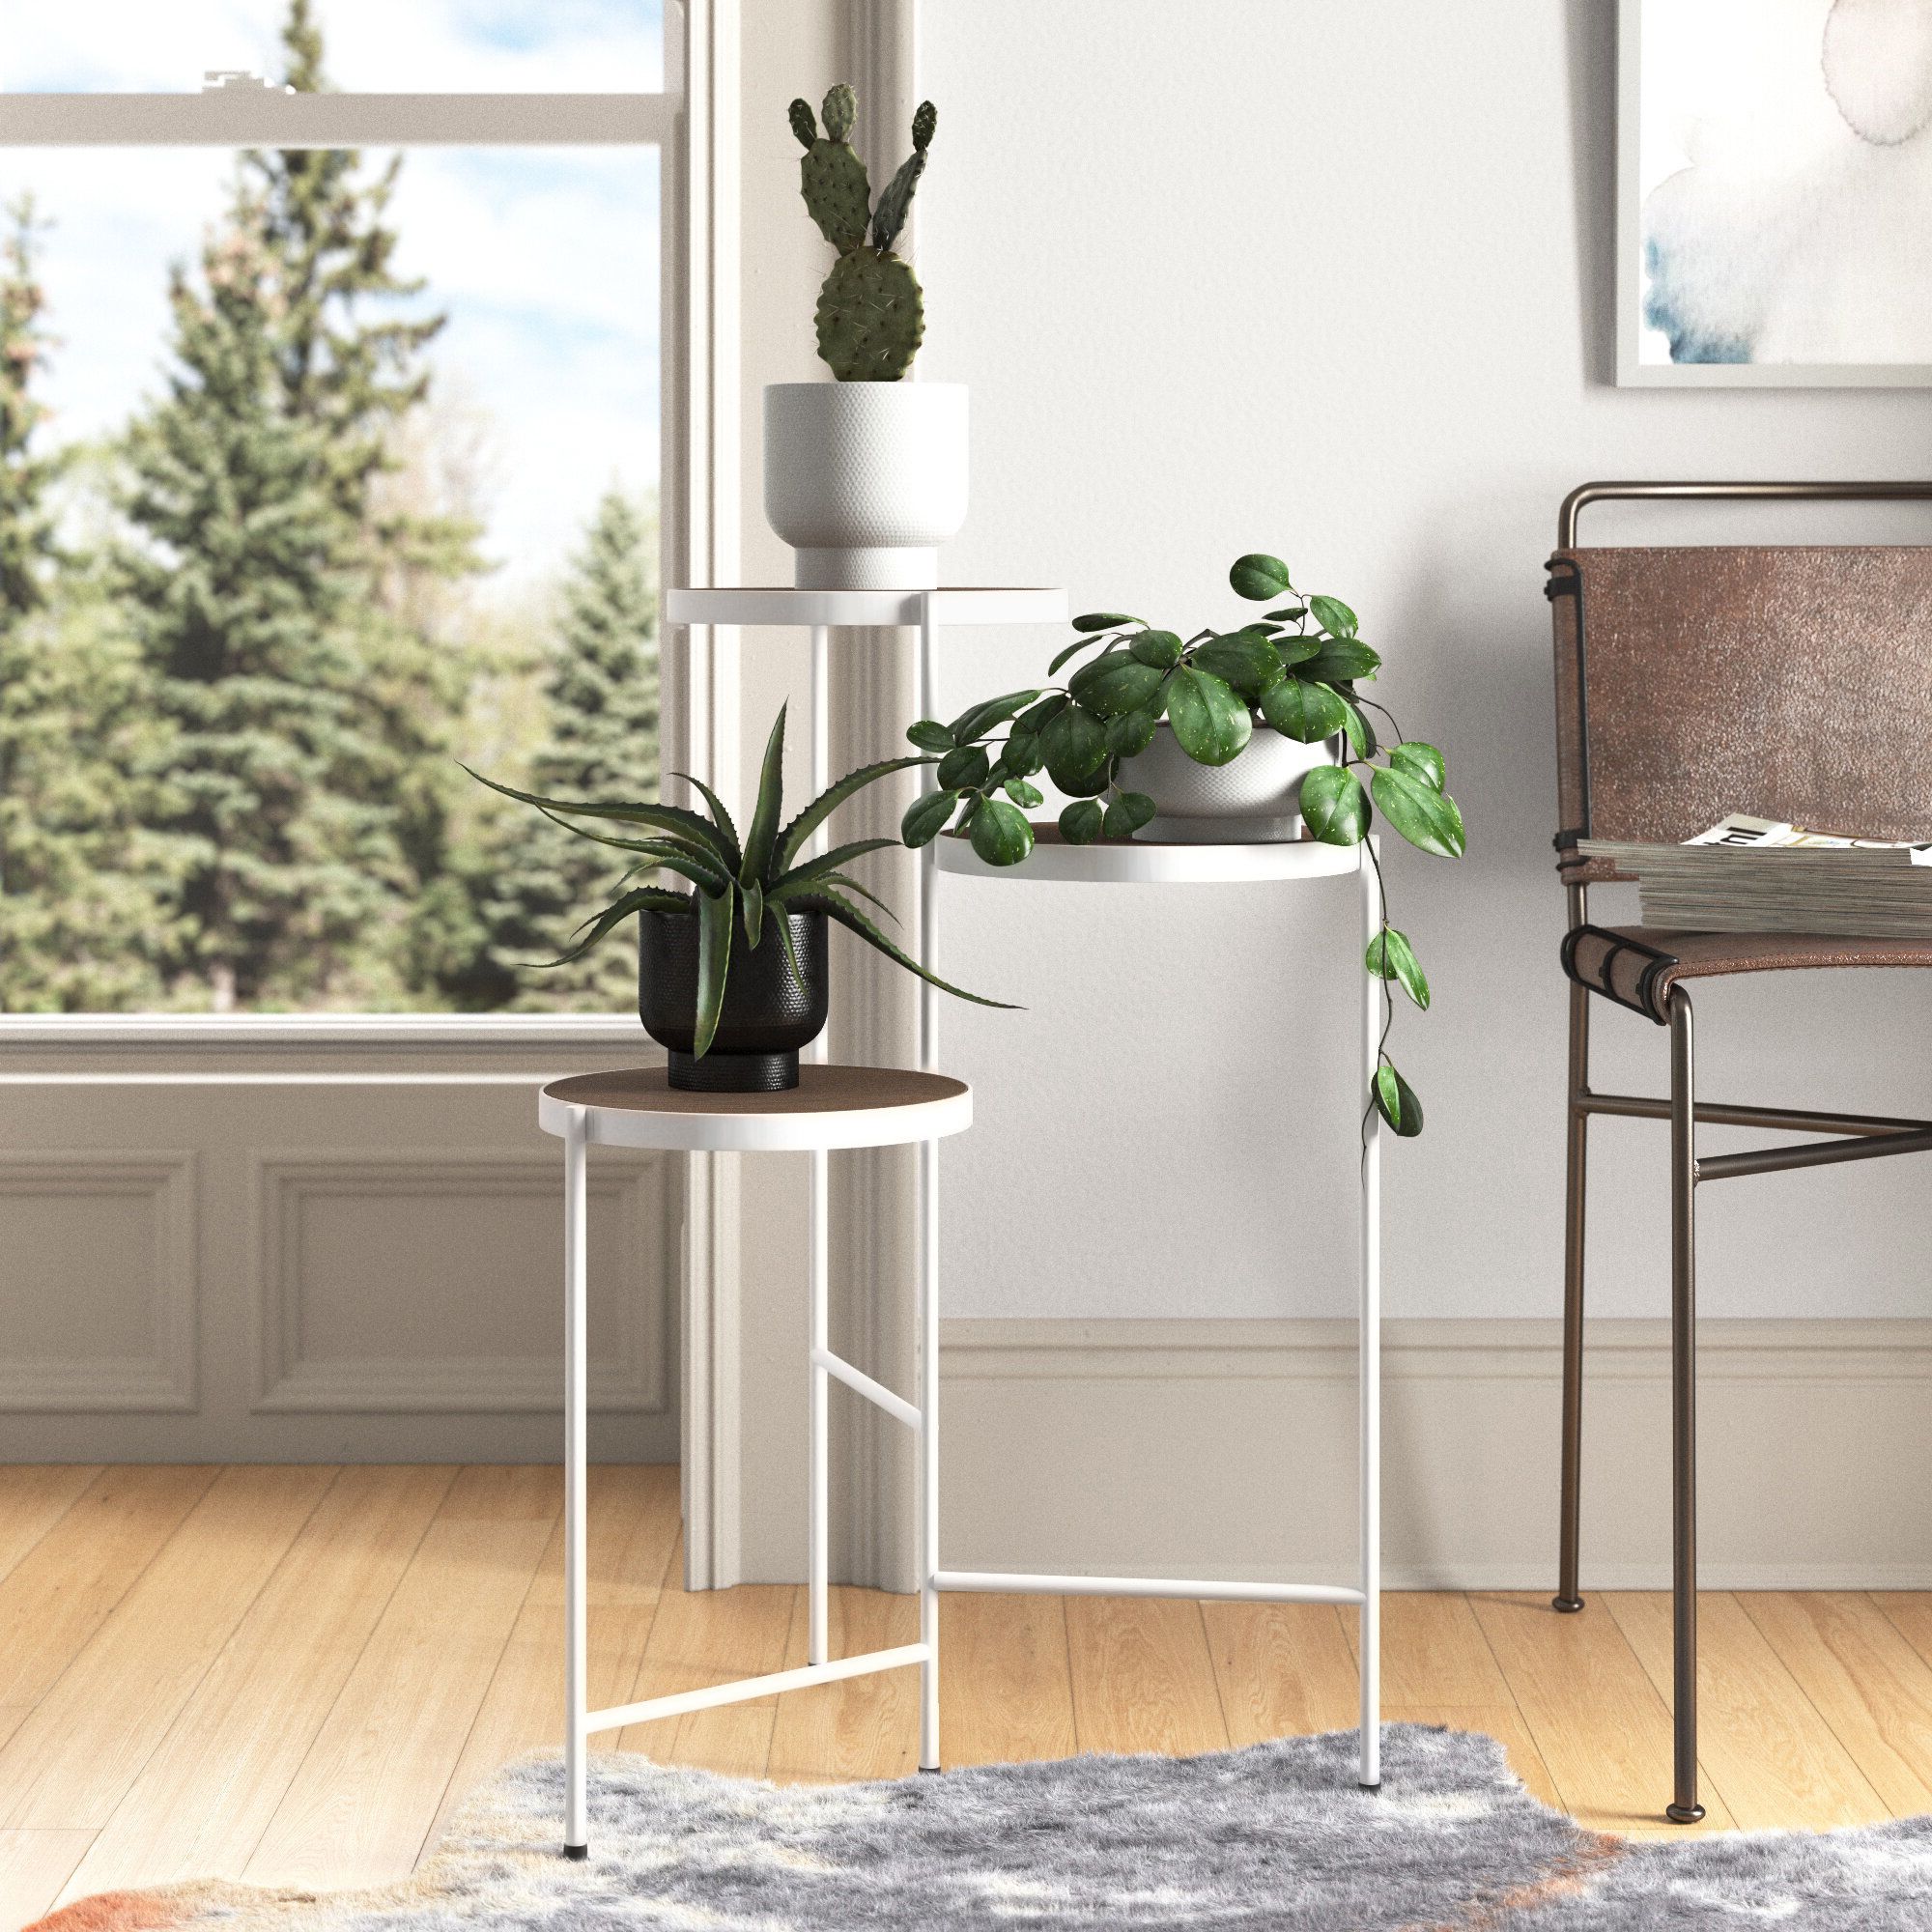 White Plant Stands & Tables You'll Love In 2023 With Regard To Most Popular White Plant Stands (View 10 of 15)